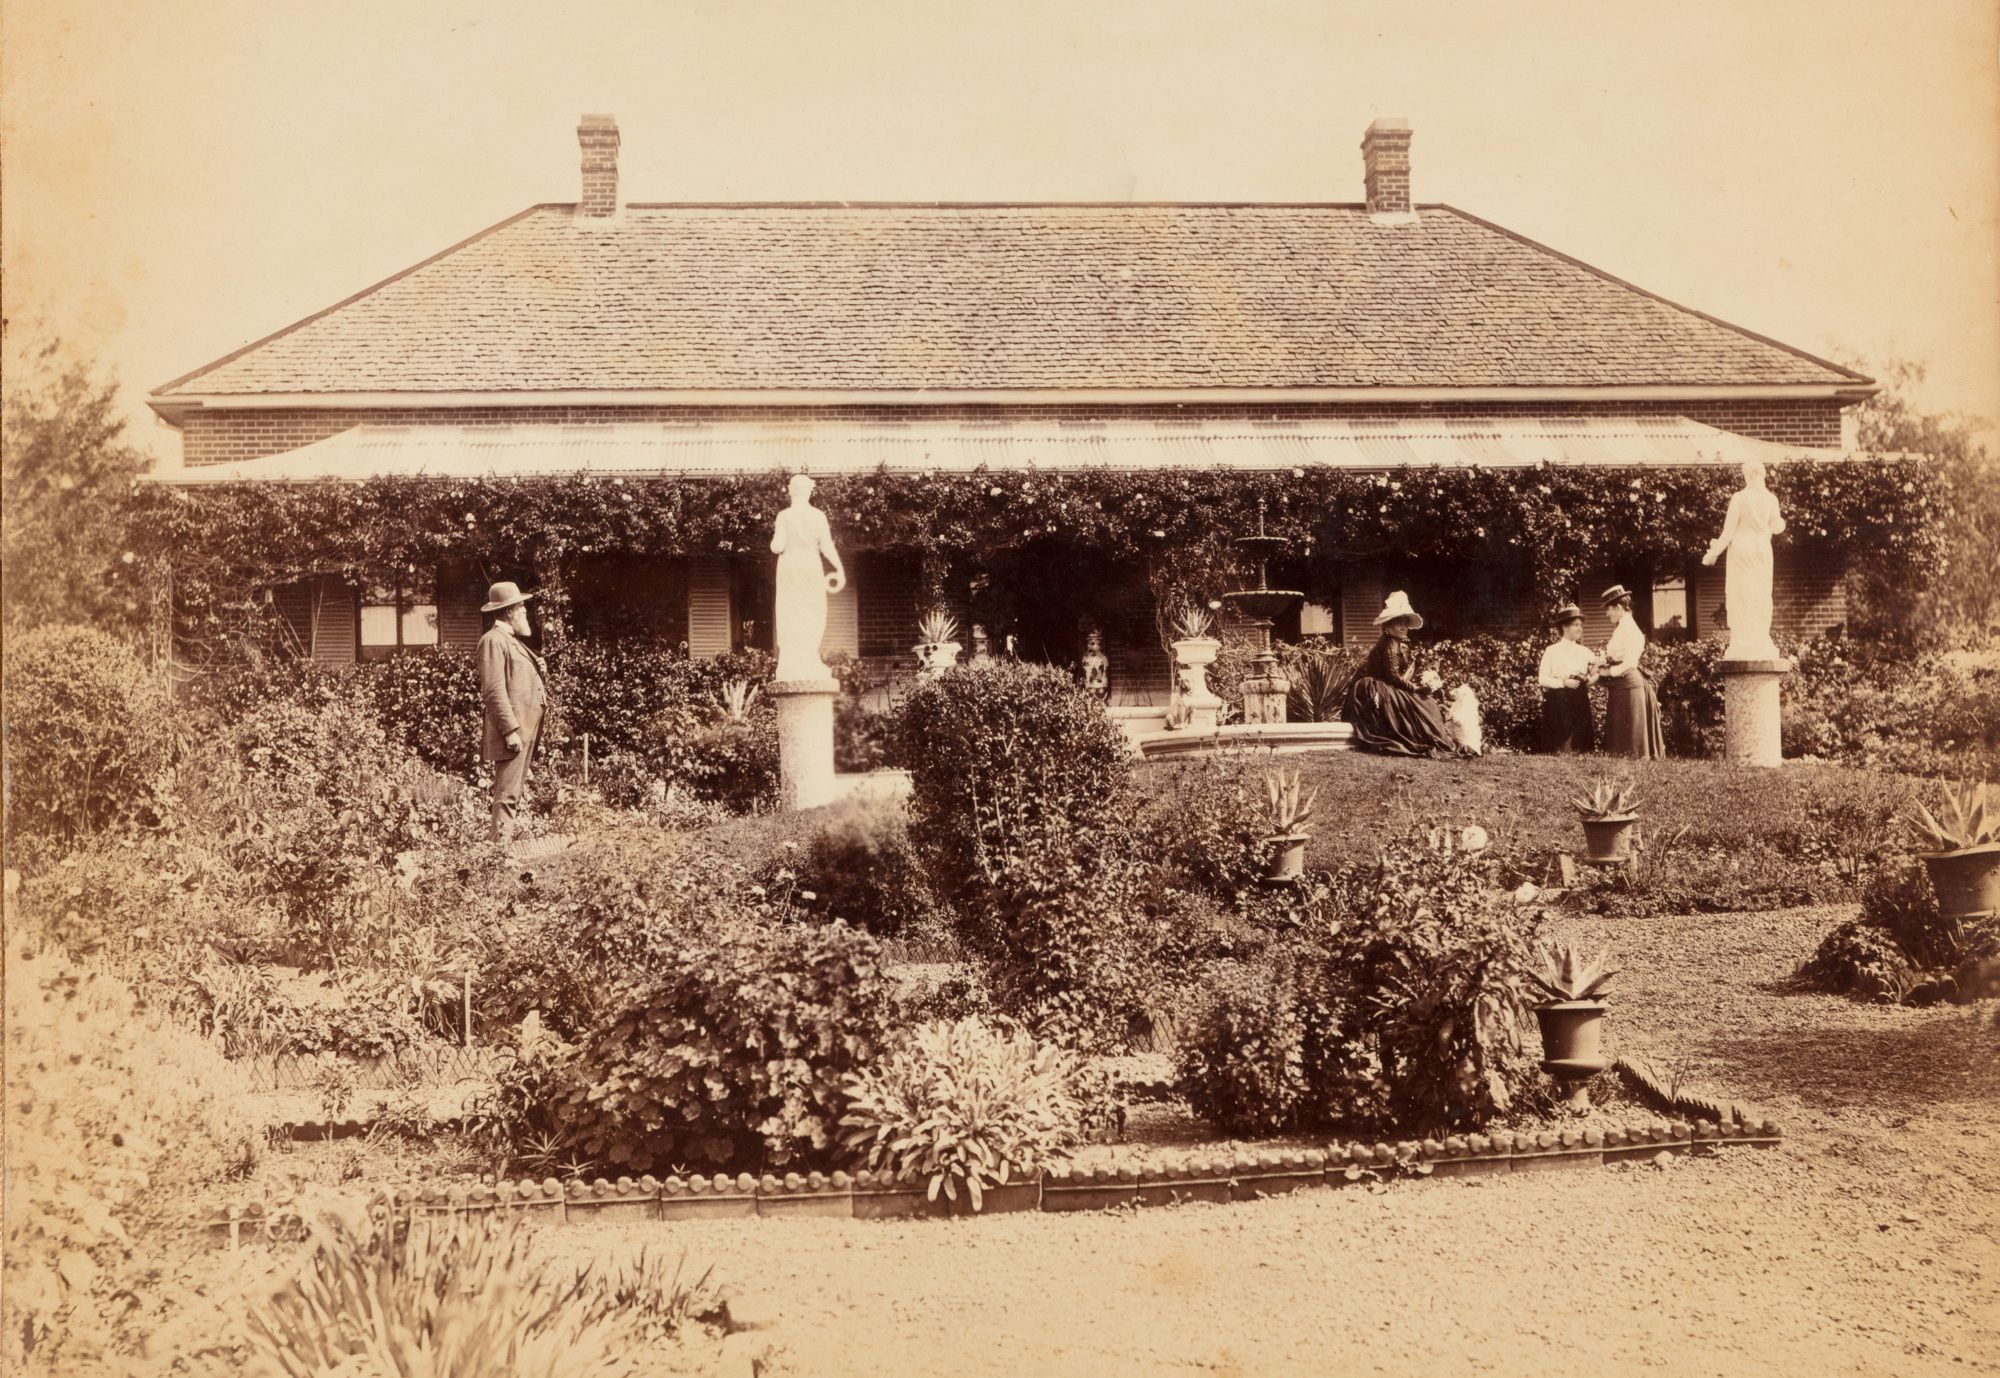 Turanville near Scone, property of Thomas Cook Esq.: a view of the grounds from the front of the house, Joseph Check, 1889